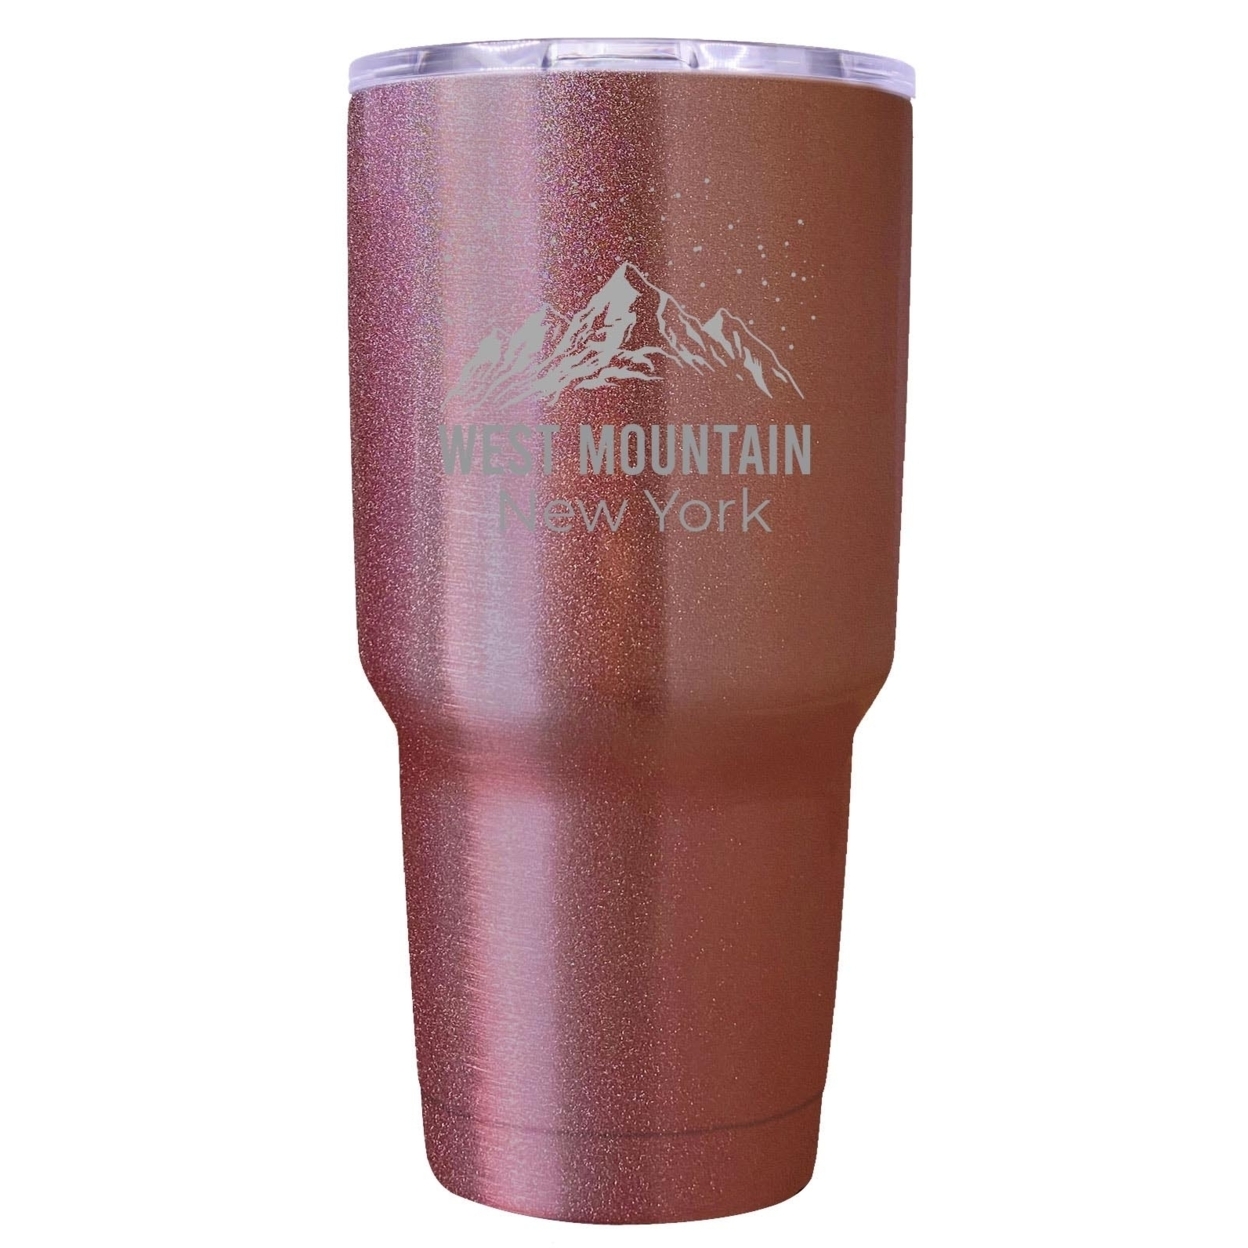 West Mountain New York Ski Snowboard Winter Souvenir Laser Engraved 24 Oz Insulated Stainless Steel Tumbler - Rose Gold